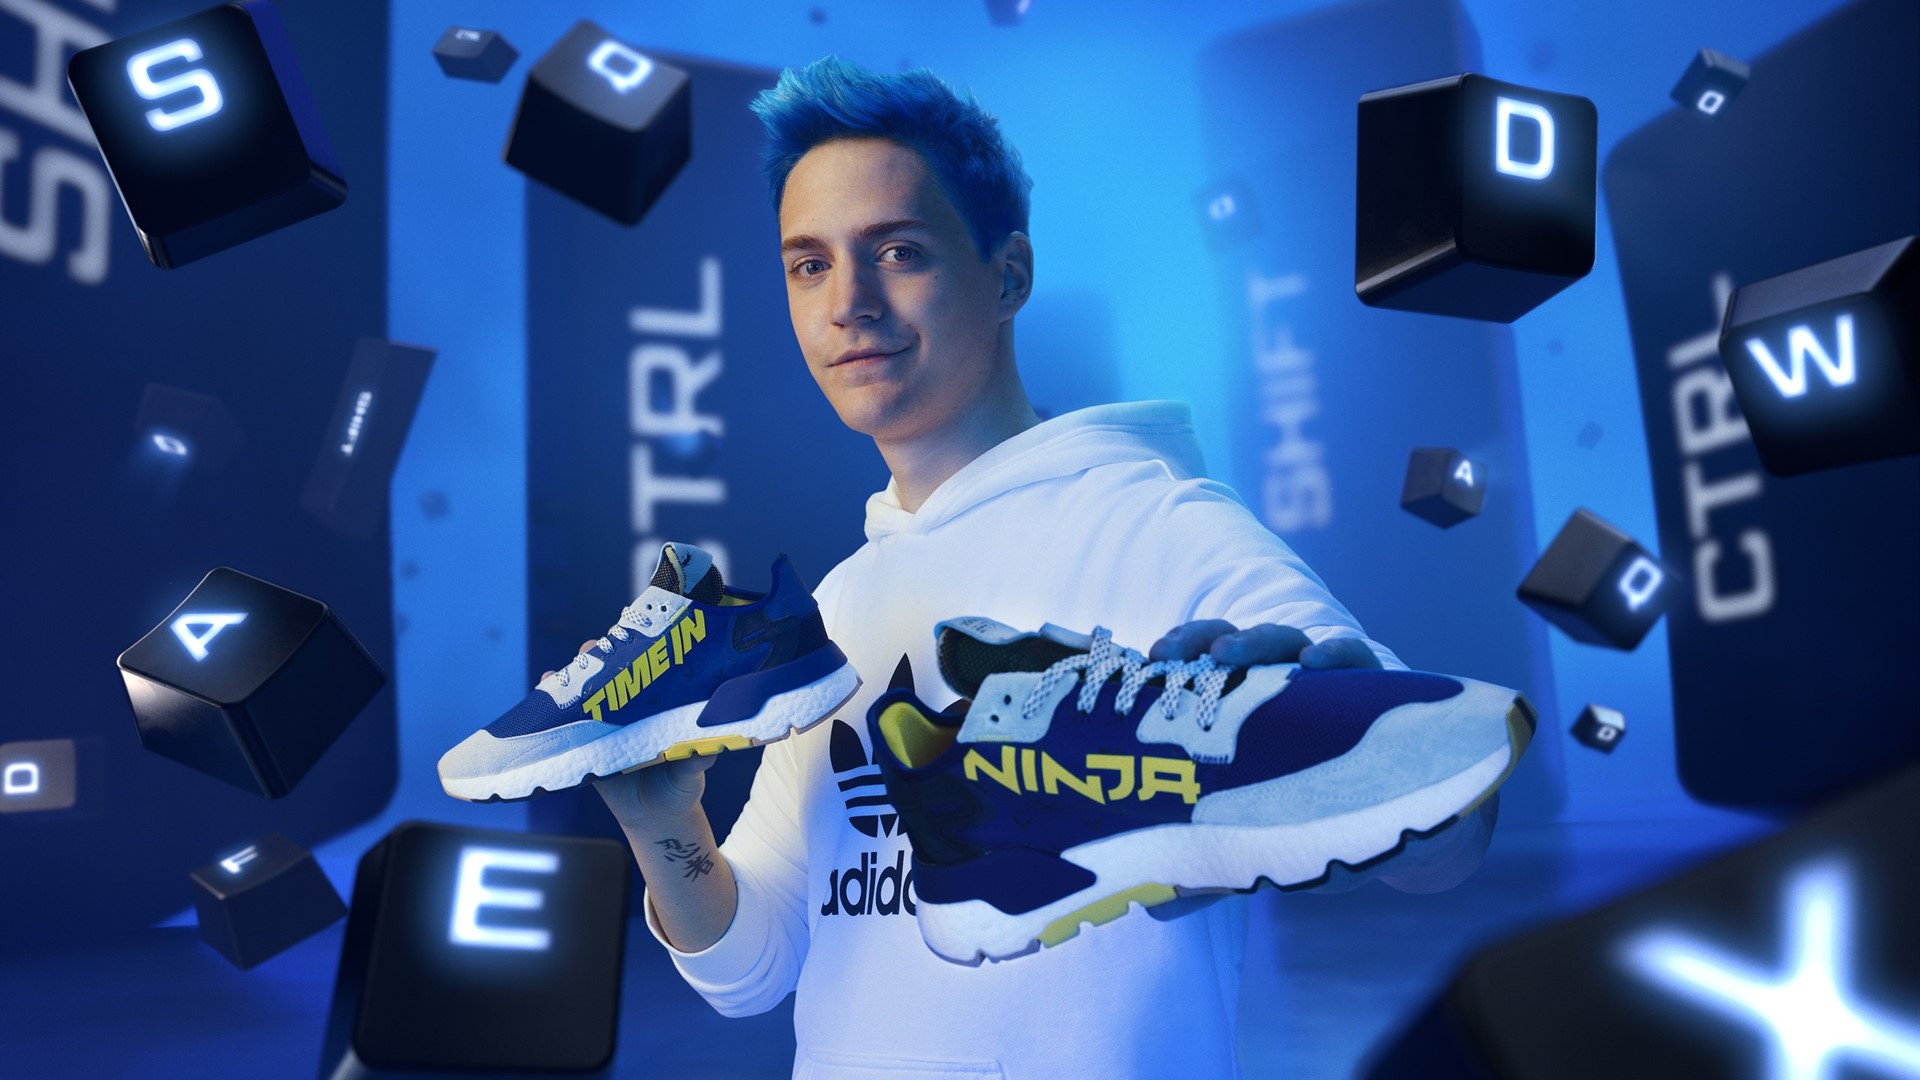 tea punishment Understanding adidas and Ninja Launch Collaborative 'Time In' Nite Jogger